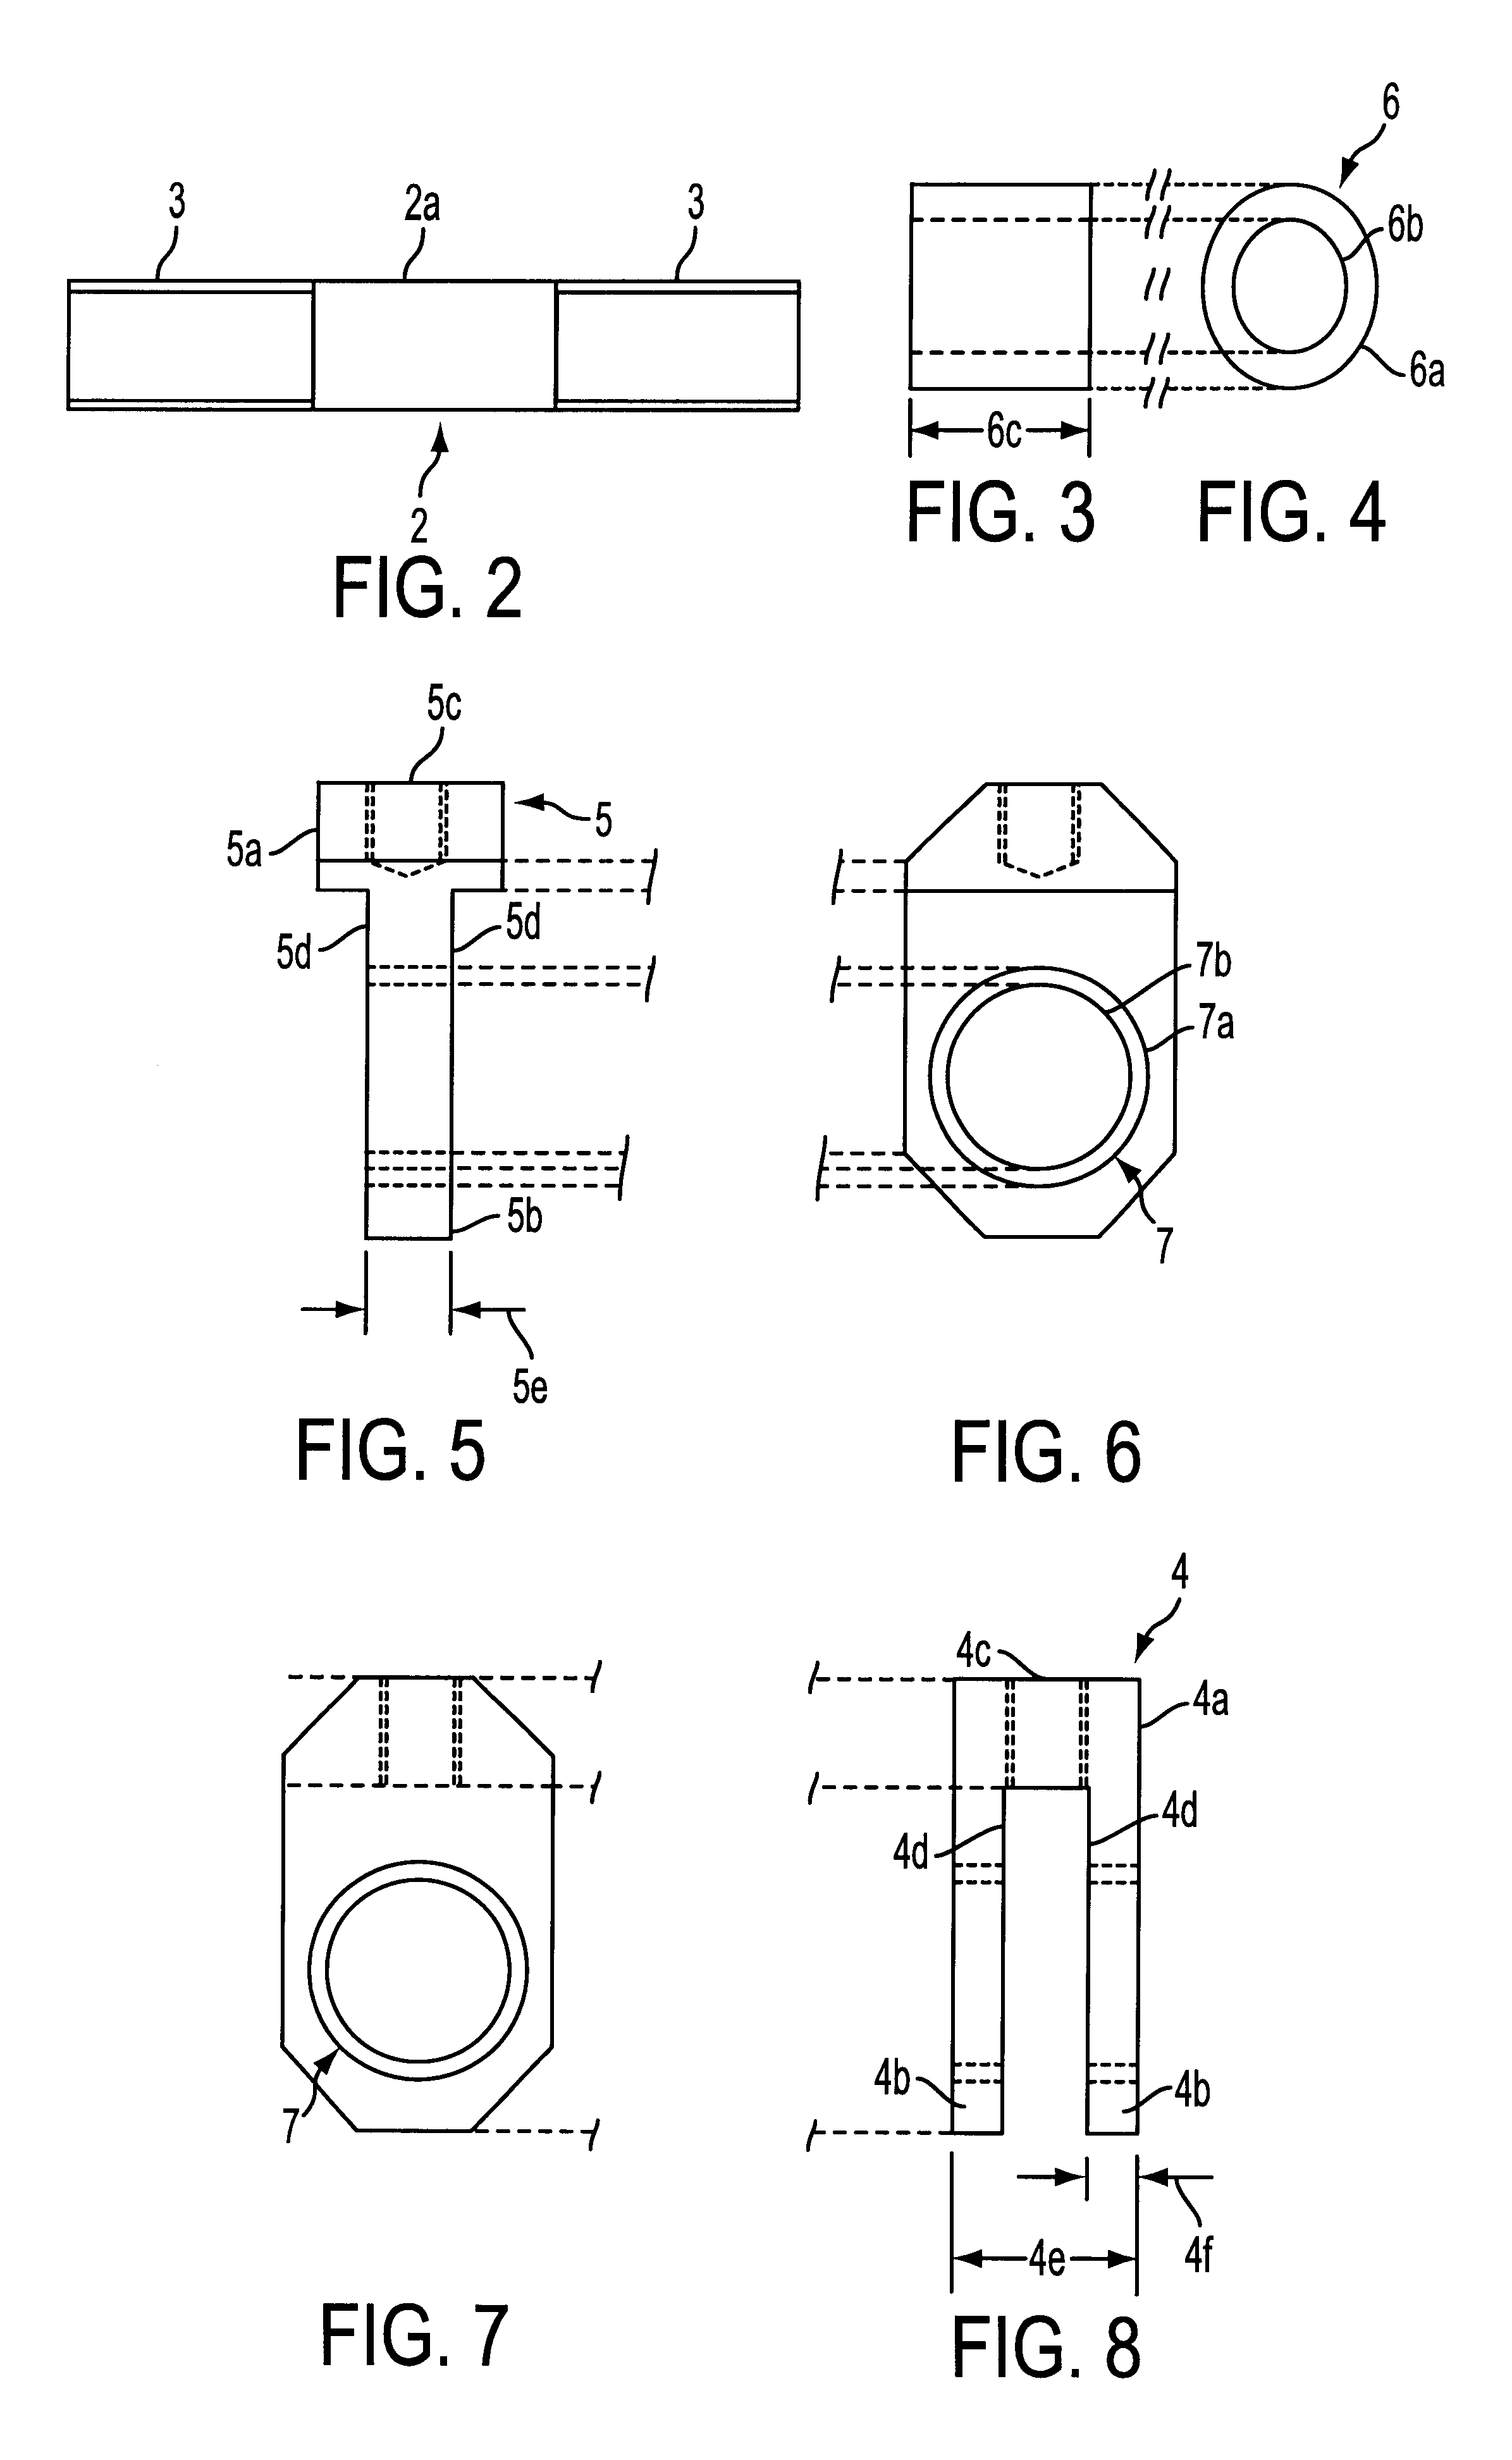 Inertial exerciser device, method of assembly, and method of exercising therewith